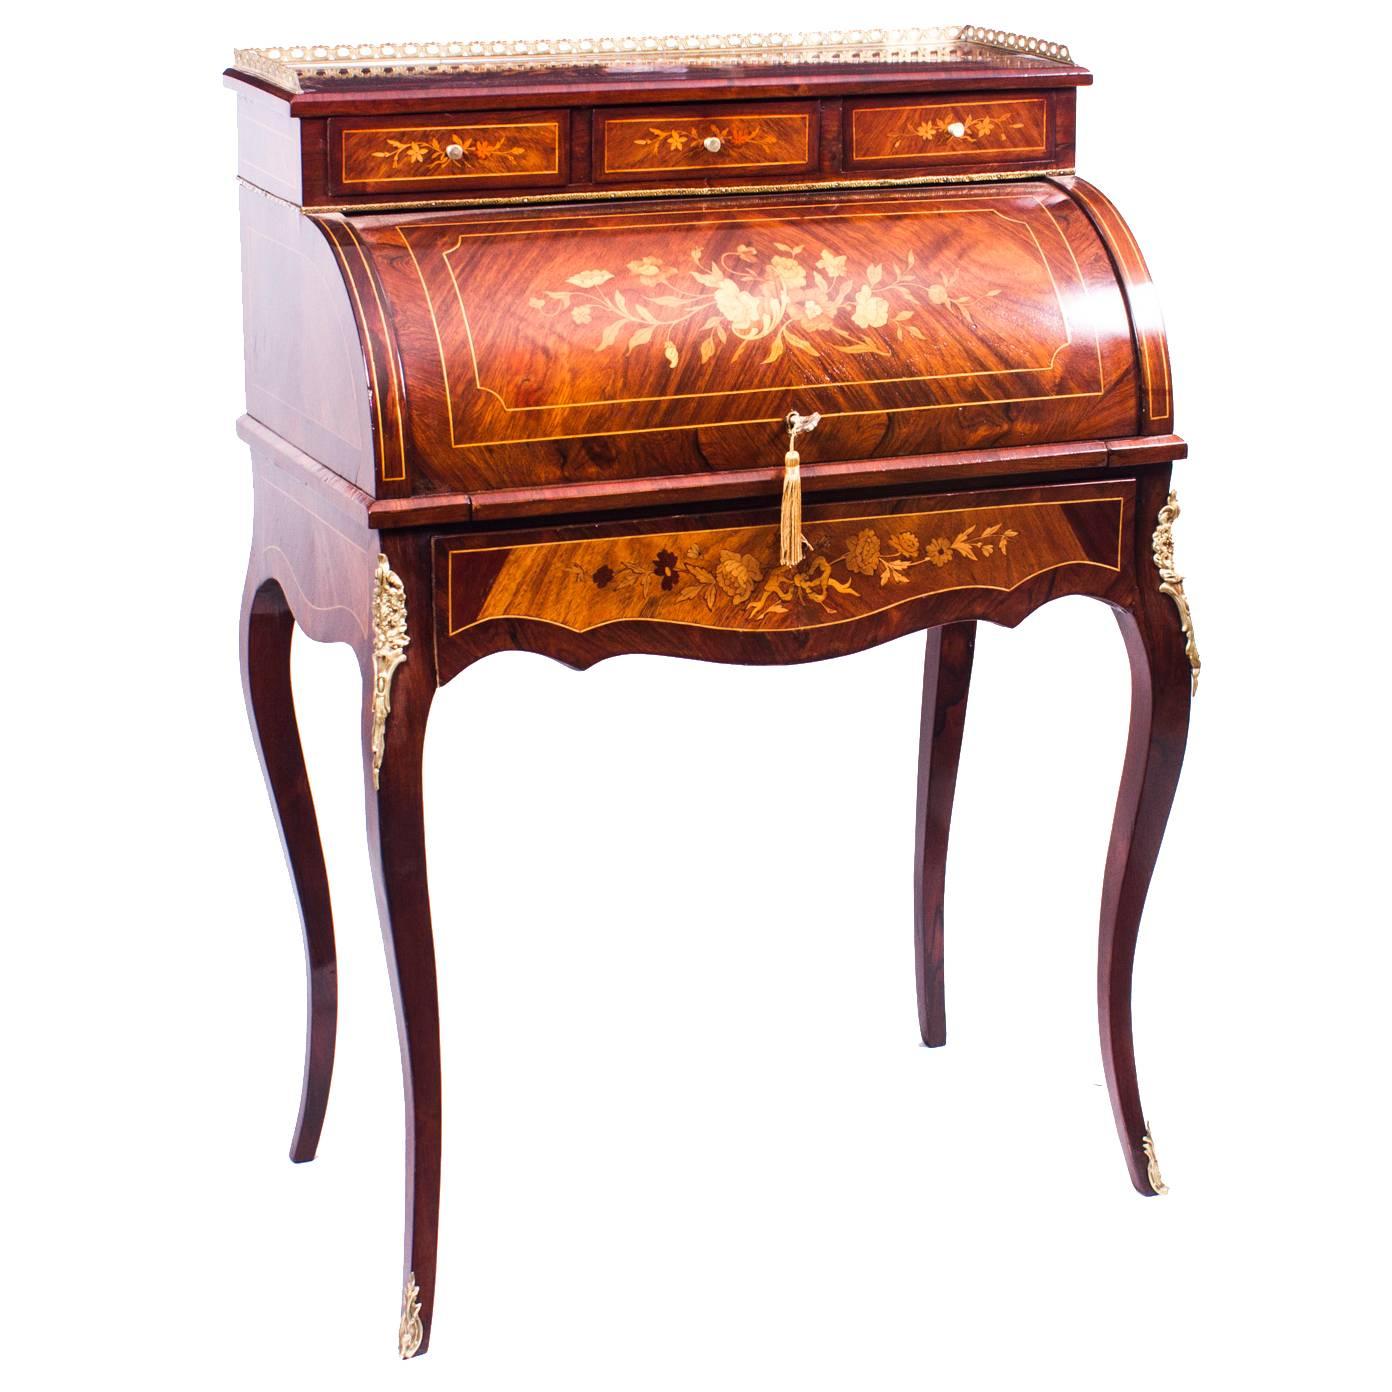 Antique French Louis XV Revival Rosewood Cylinder Bureau, circa 1870